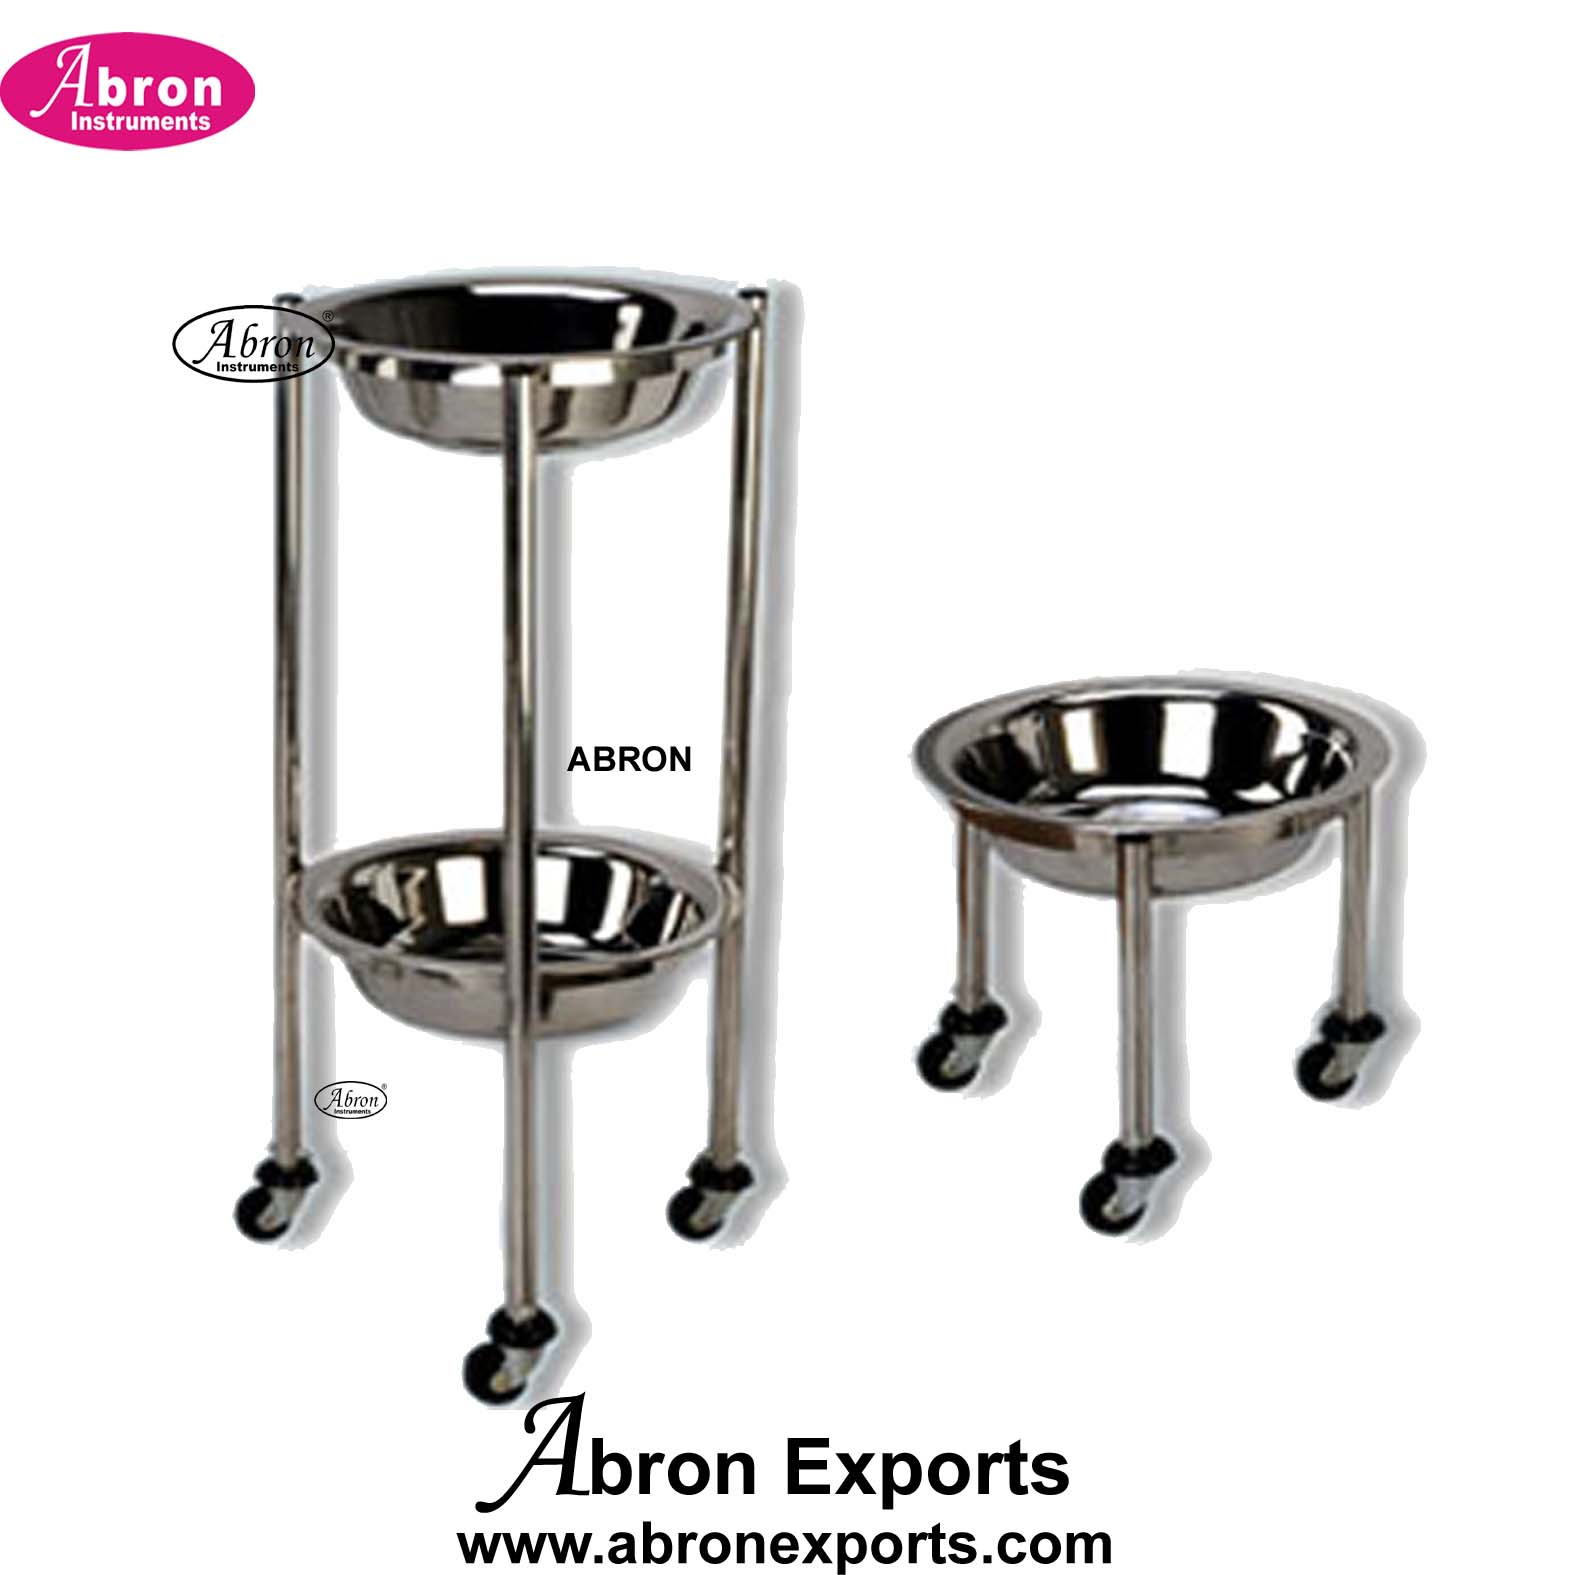 Hospital Holloware SS Bowl stands Kick Basket Round SS Stainless Steel Abron ABM-2325BST 